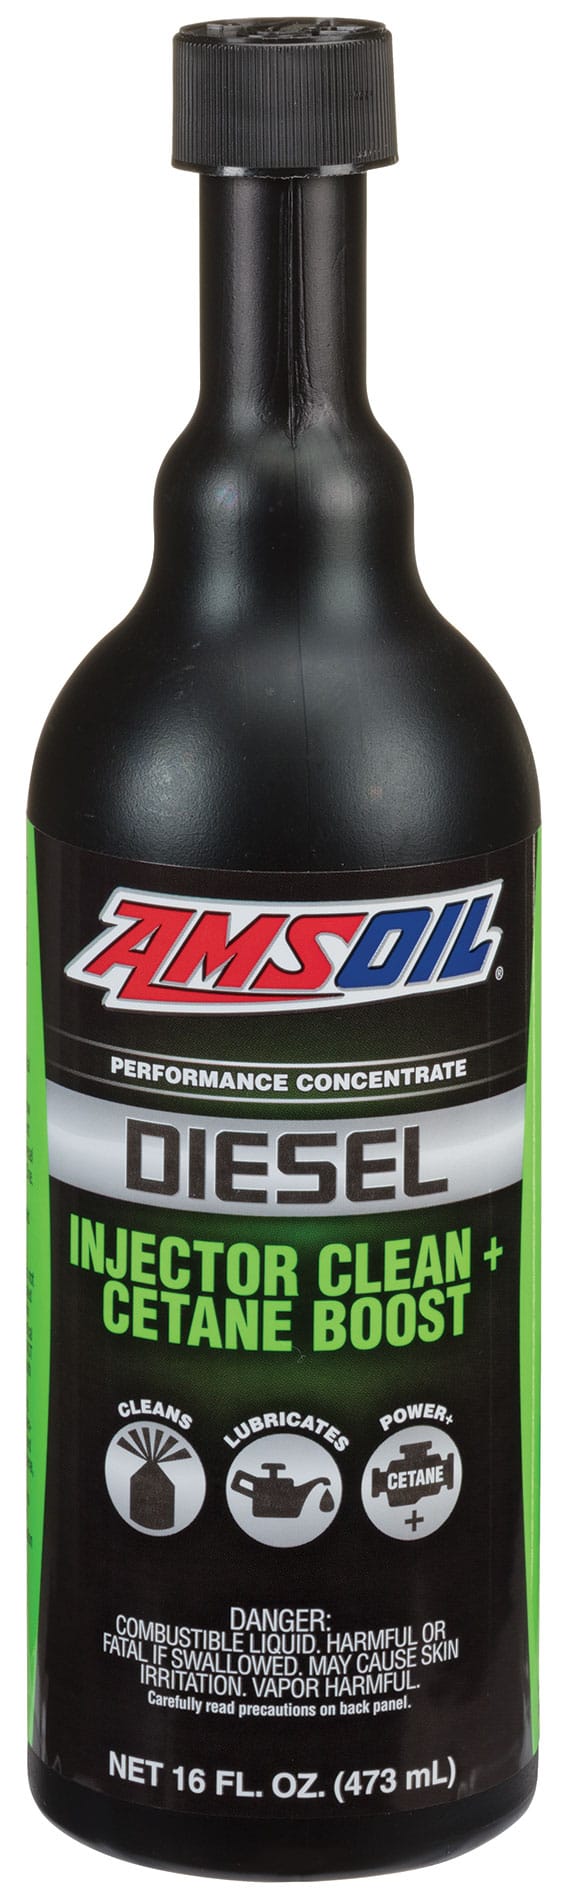 A bottle of AMSOIL Diesel Injector Clean + Cetane Boost, specially engineered to defend your engine and fuel system against performance-robbing wear and deposits.